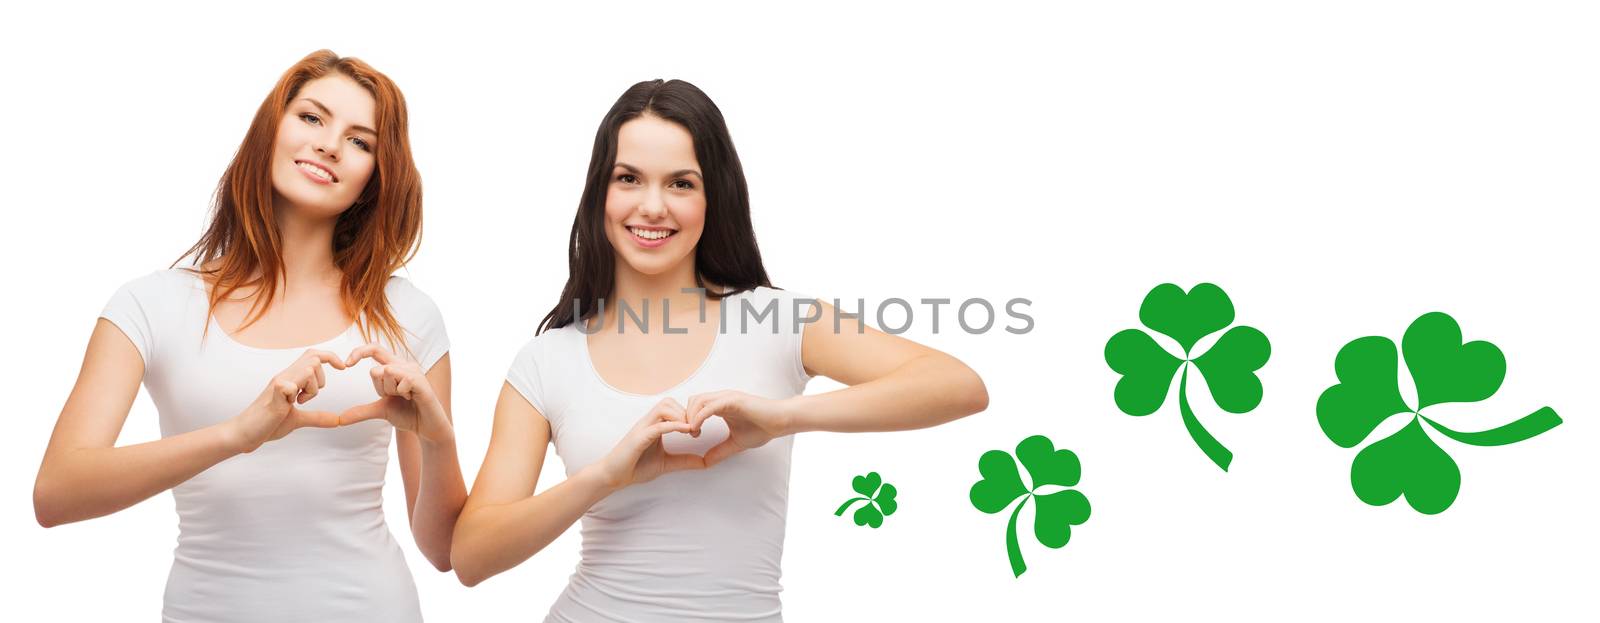 smiling girls showing heart gesture with shamrock by dolgachov